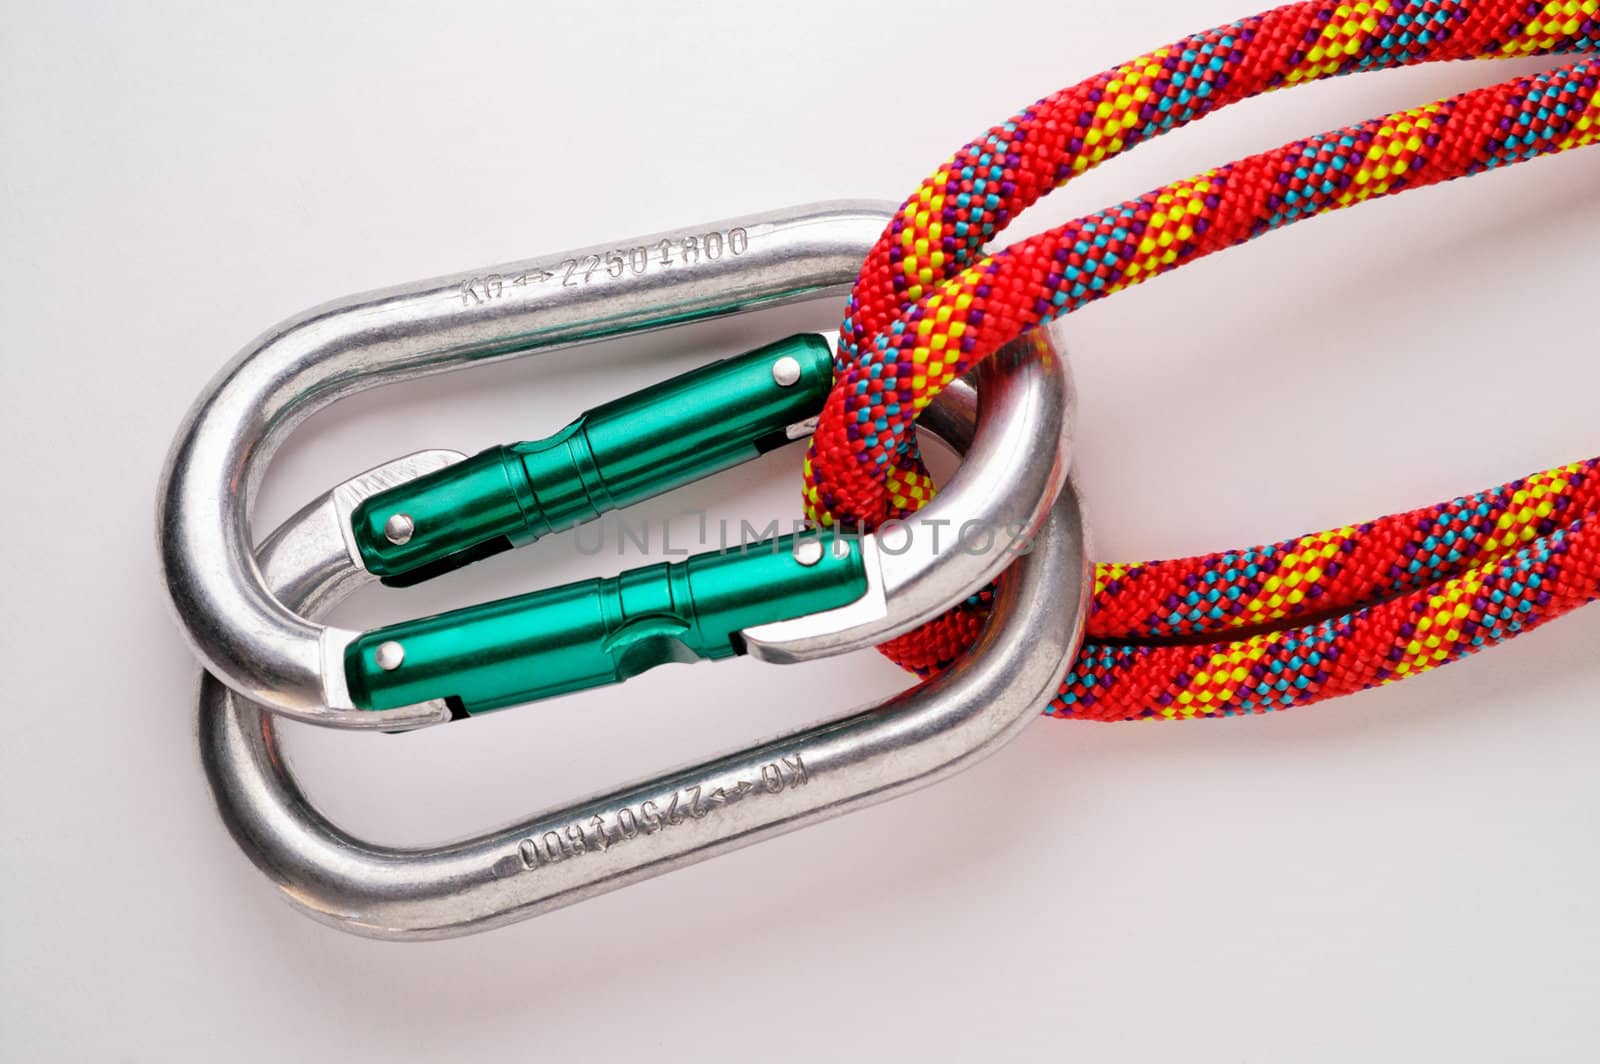 Mountaineering: doubled oval aluminium carabiners (SAFE) by Laborer